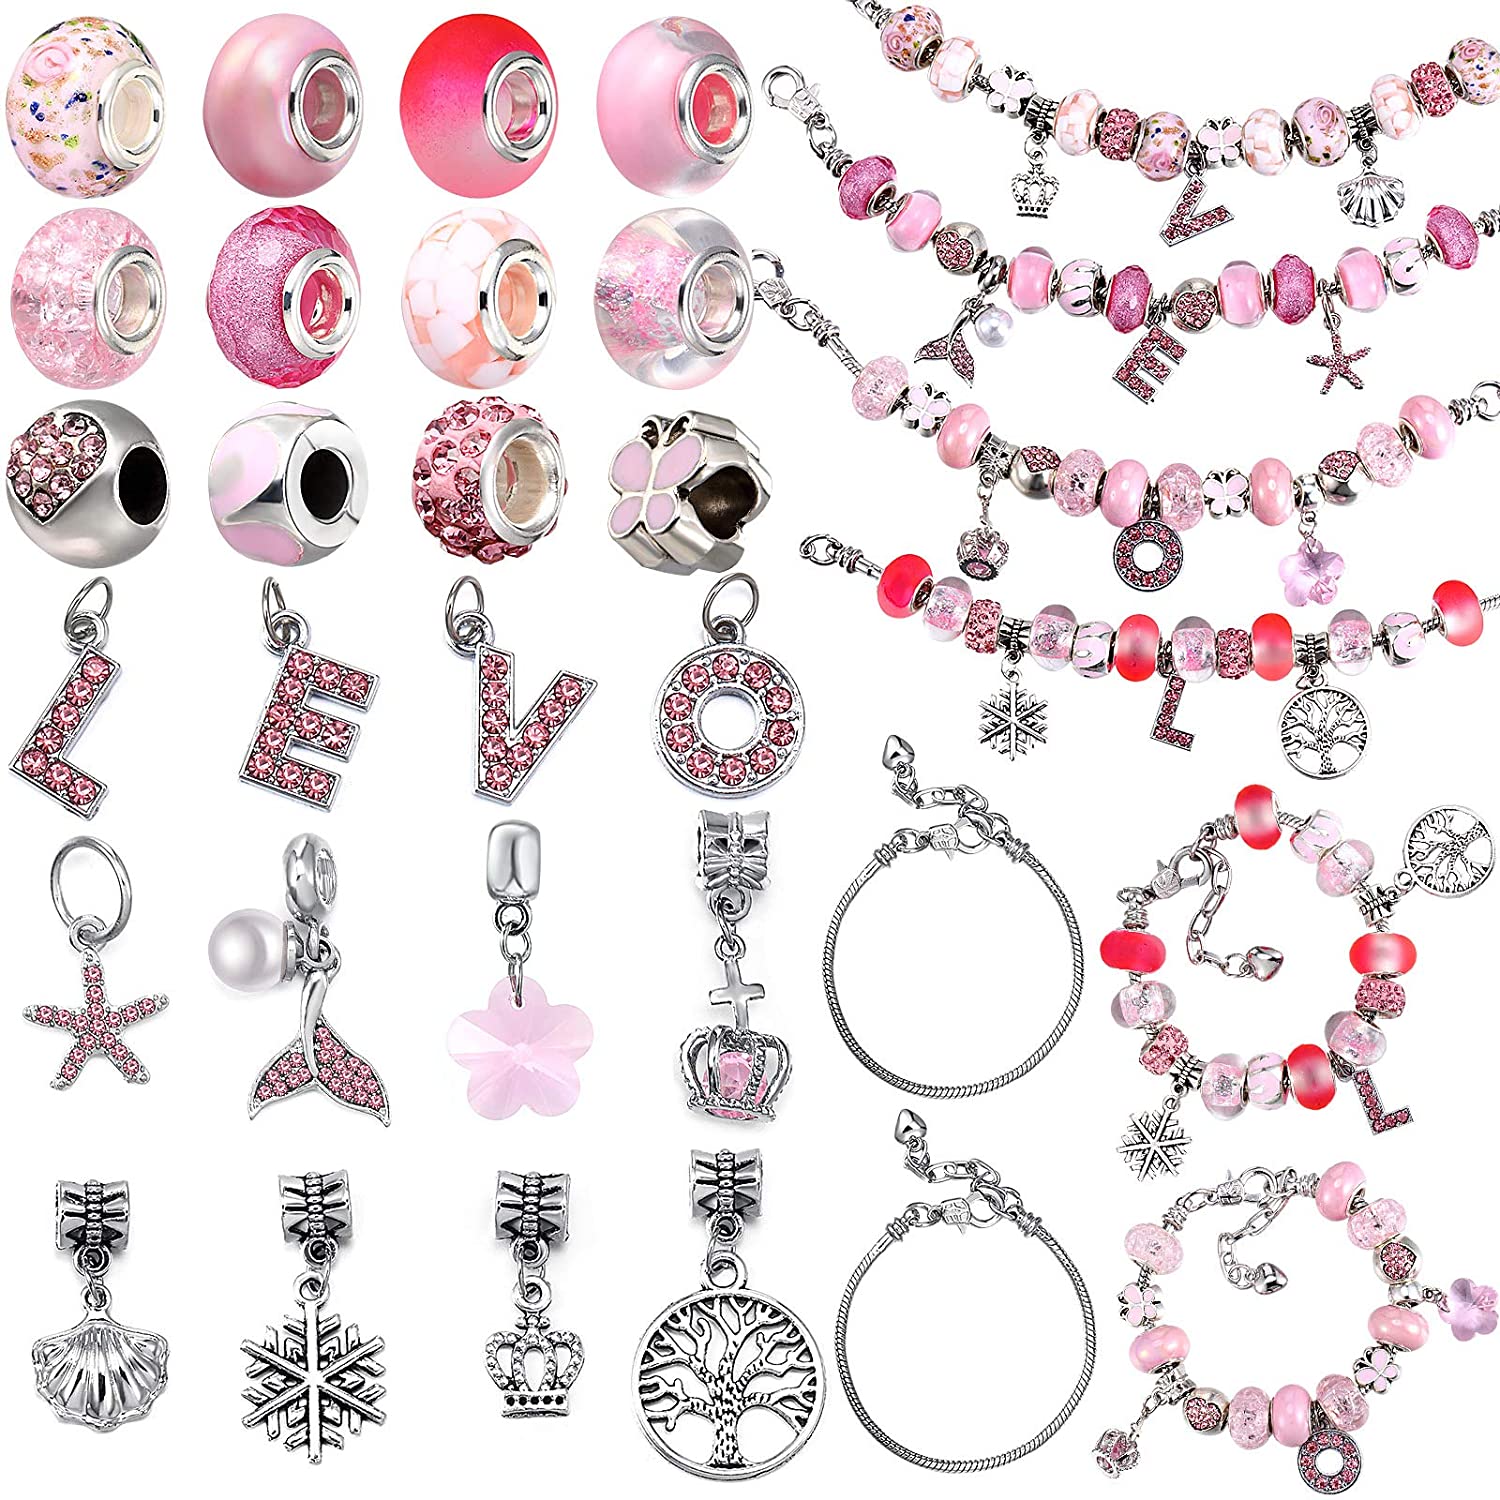 65 Pieces Charm Bracelet Kit, Assorted Pink Large Hole Glass Beads, Jewelry Pendant, Snake Bracelet Chain - image 1 of 7